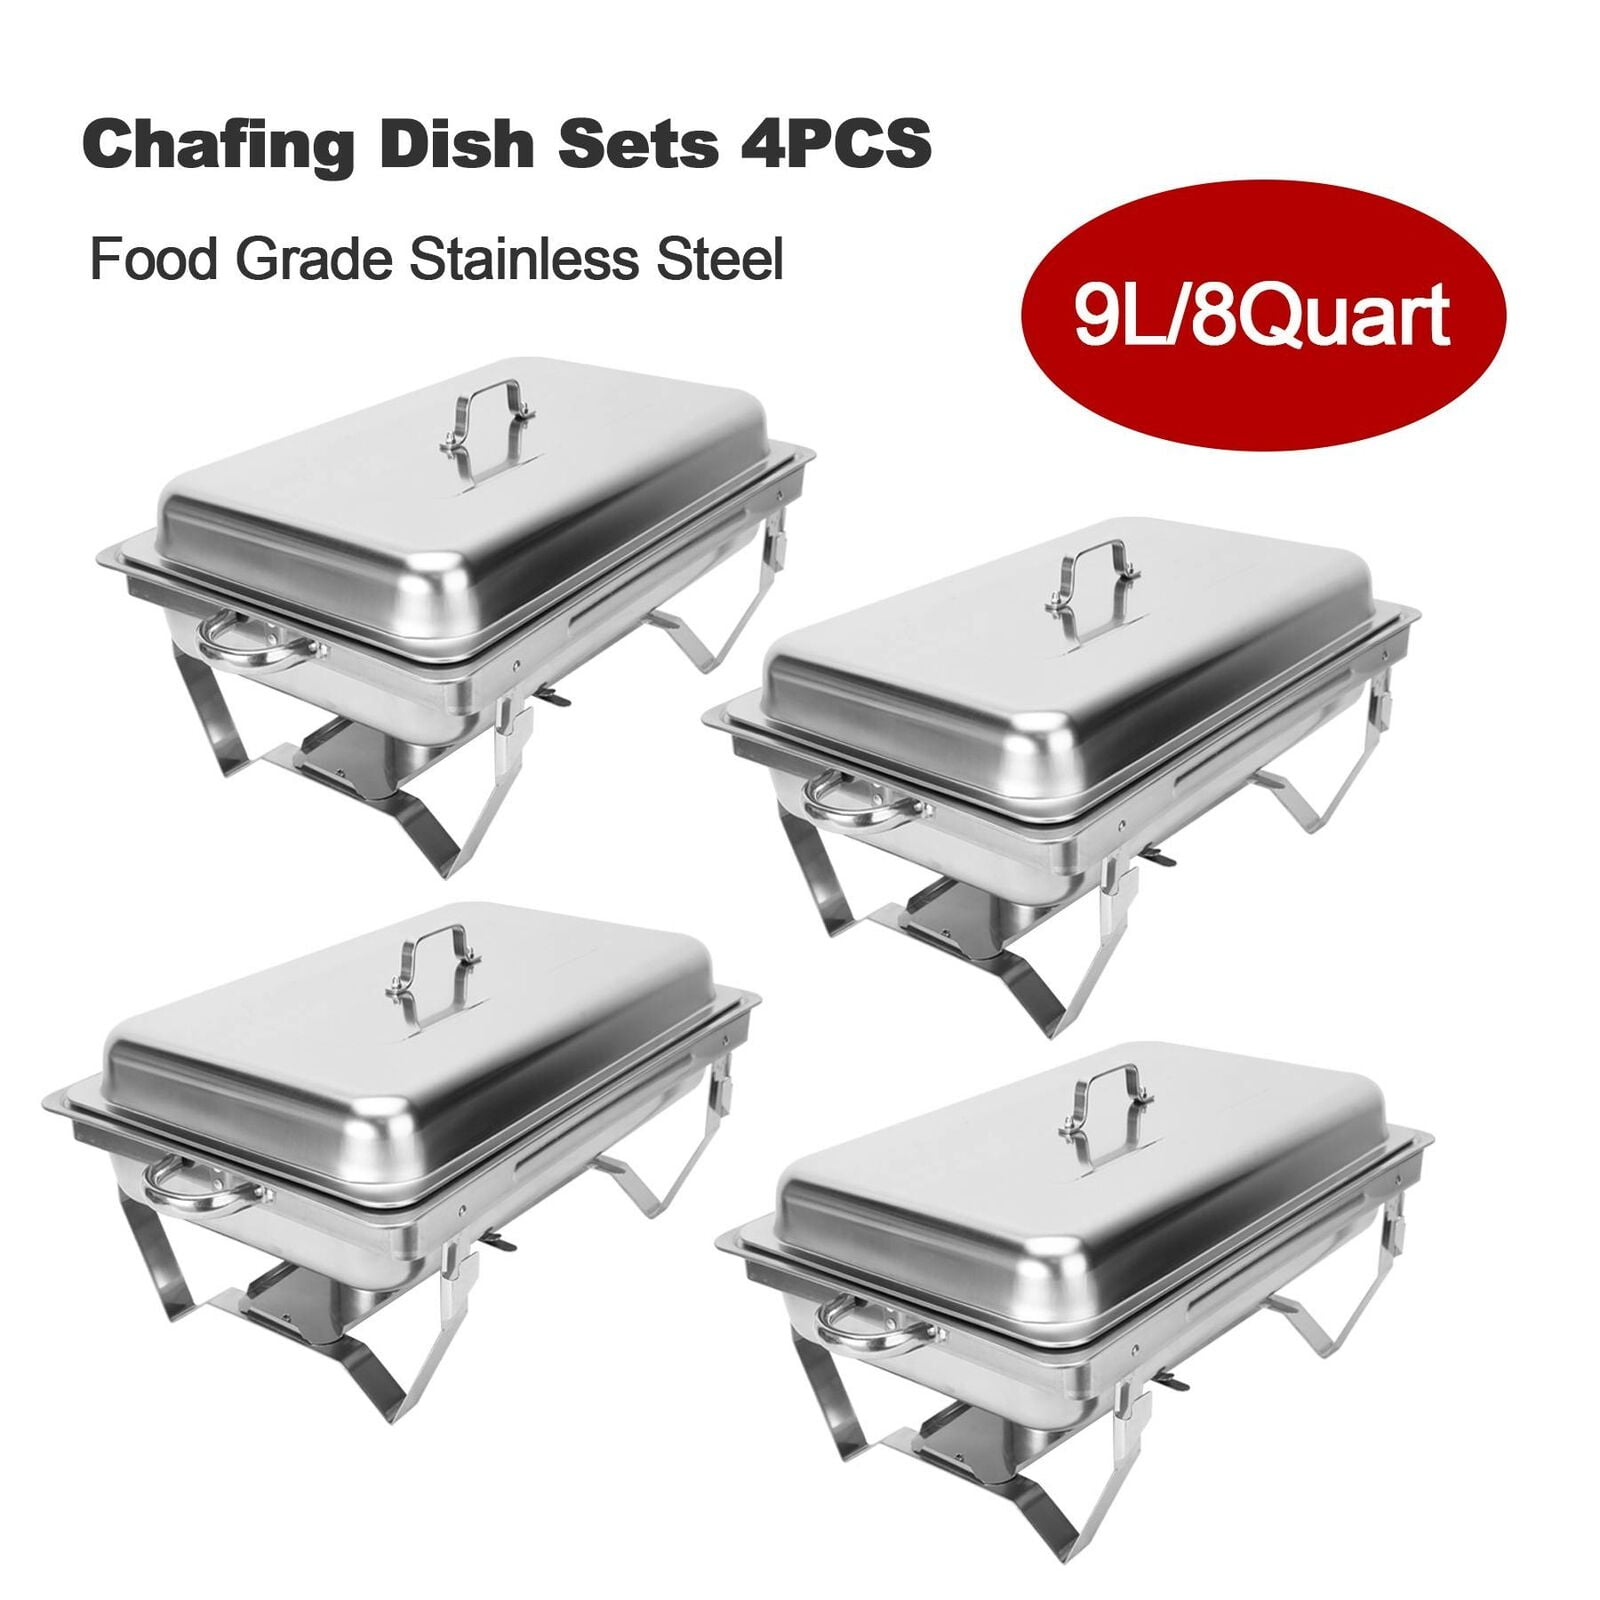 9L/8Q 2Pack Chafer Chafing Dish Sets Pans Stainless Steel Food Warmer Full Size 